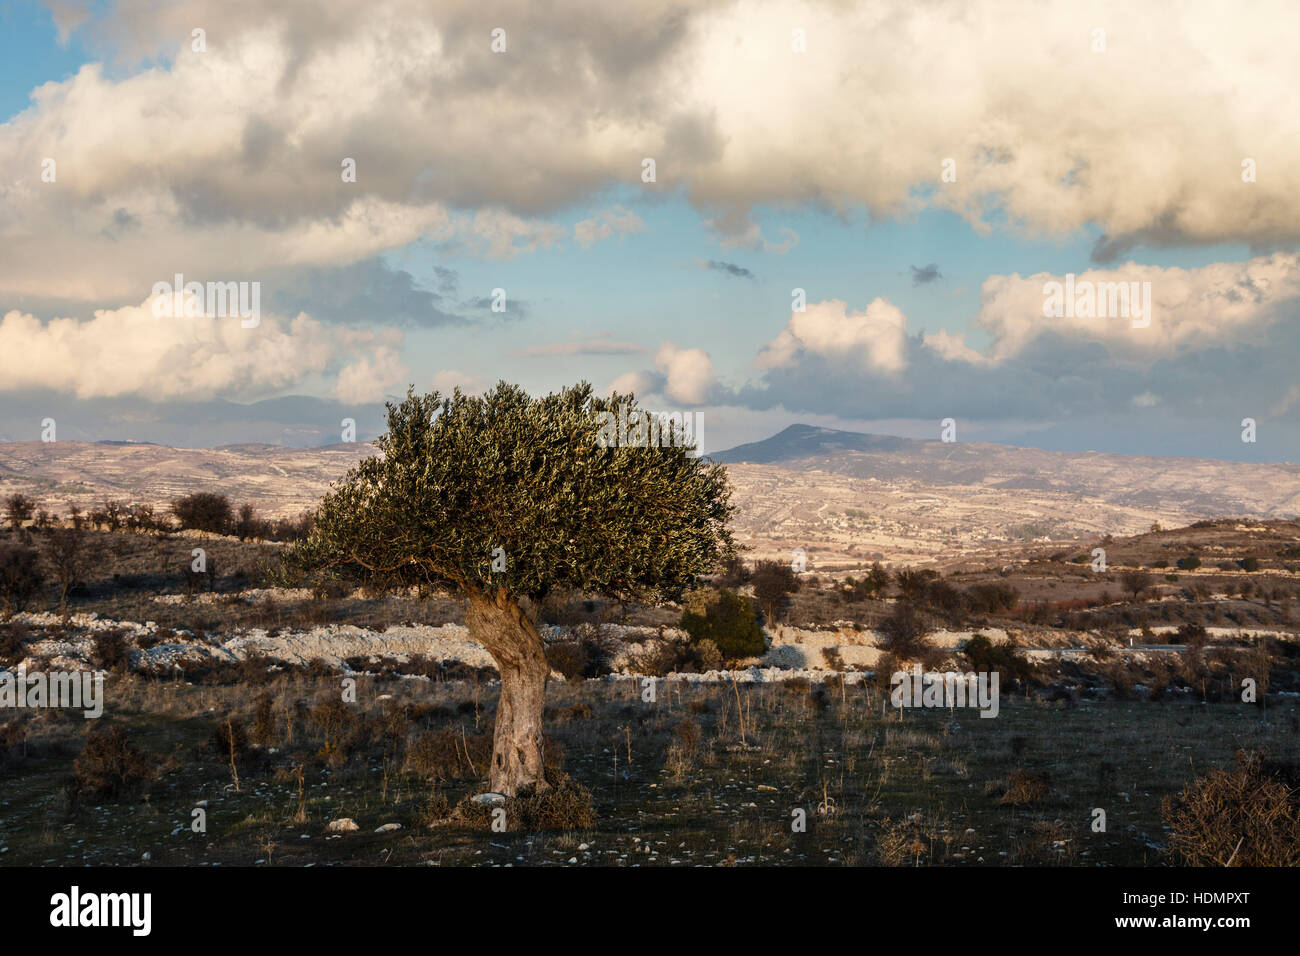 Olive tree in the foothills of the Troodos Mountains, Cyprus Stock Photo